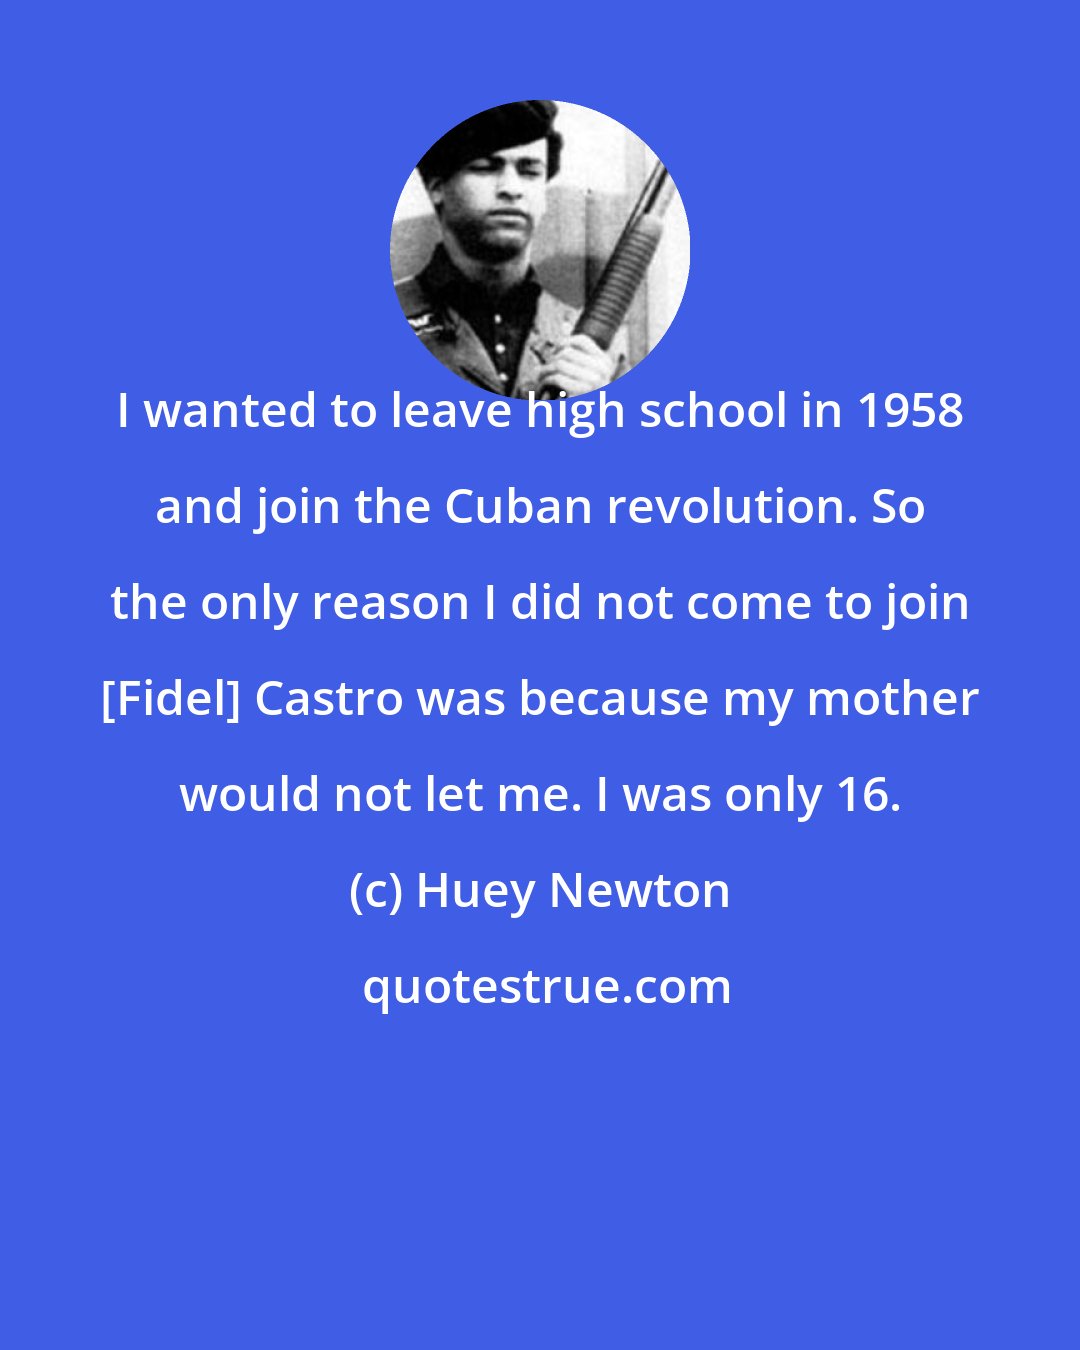 Huey Newton: I wanted to leave high school in 1958 and join the Cuban revolution. So the only reason I did not come to join [Fidel] Castro was because my mother would not let me. I was only 16.